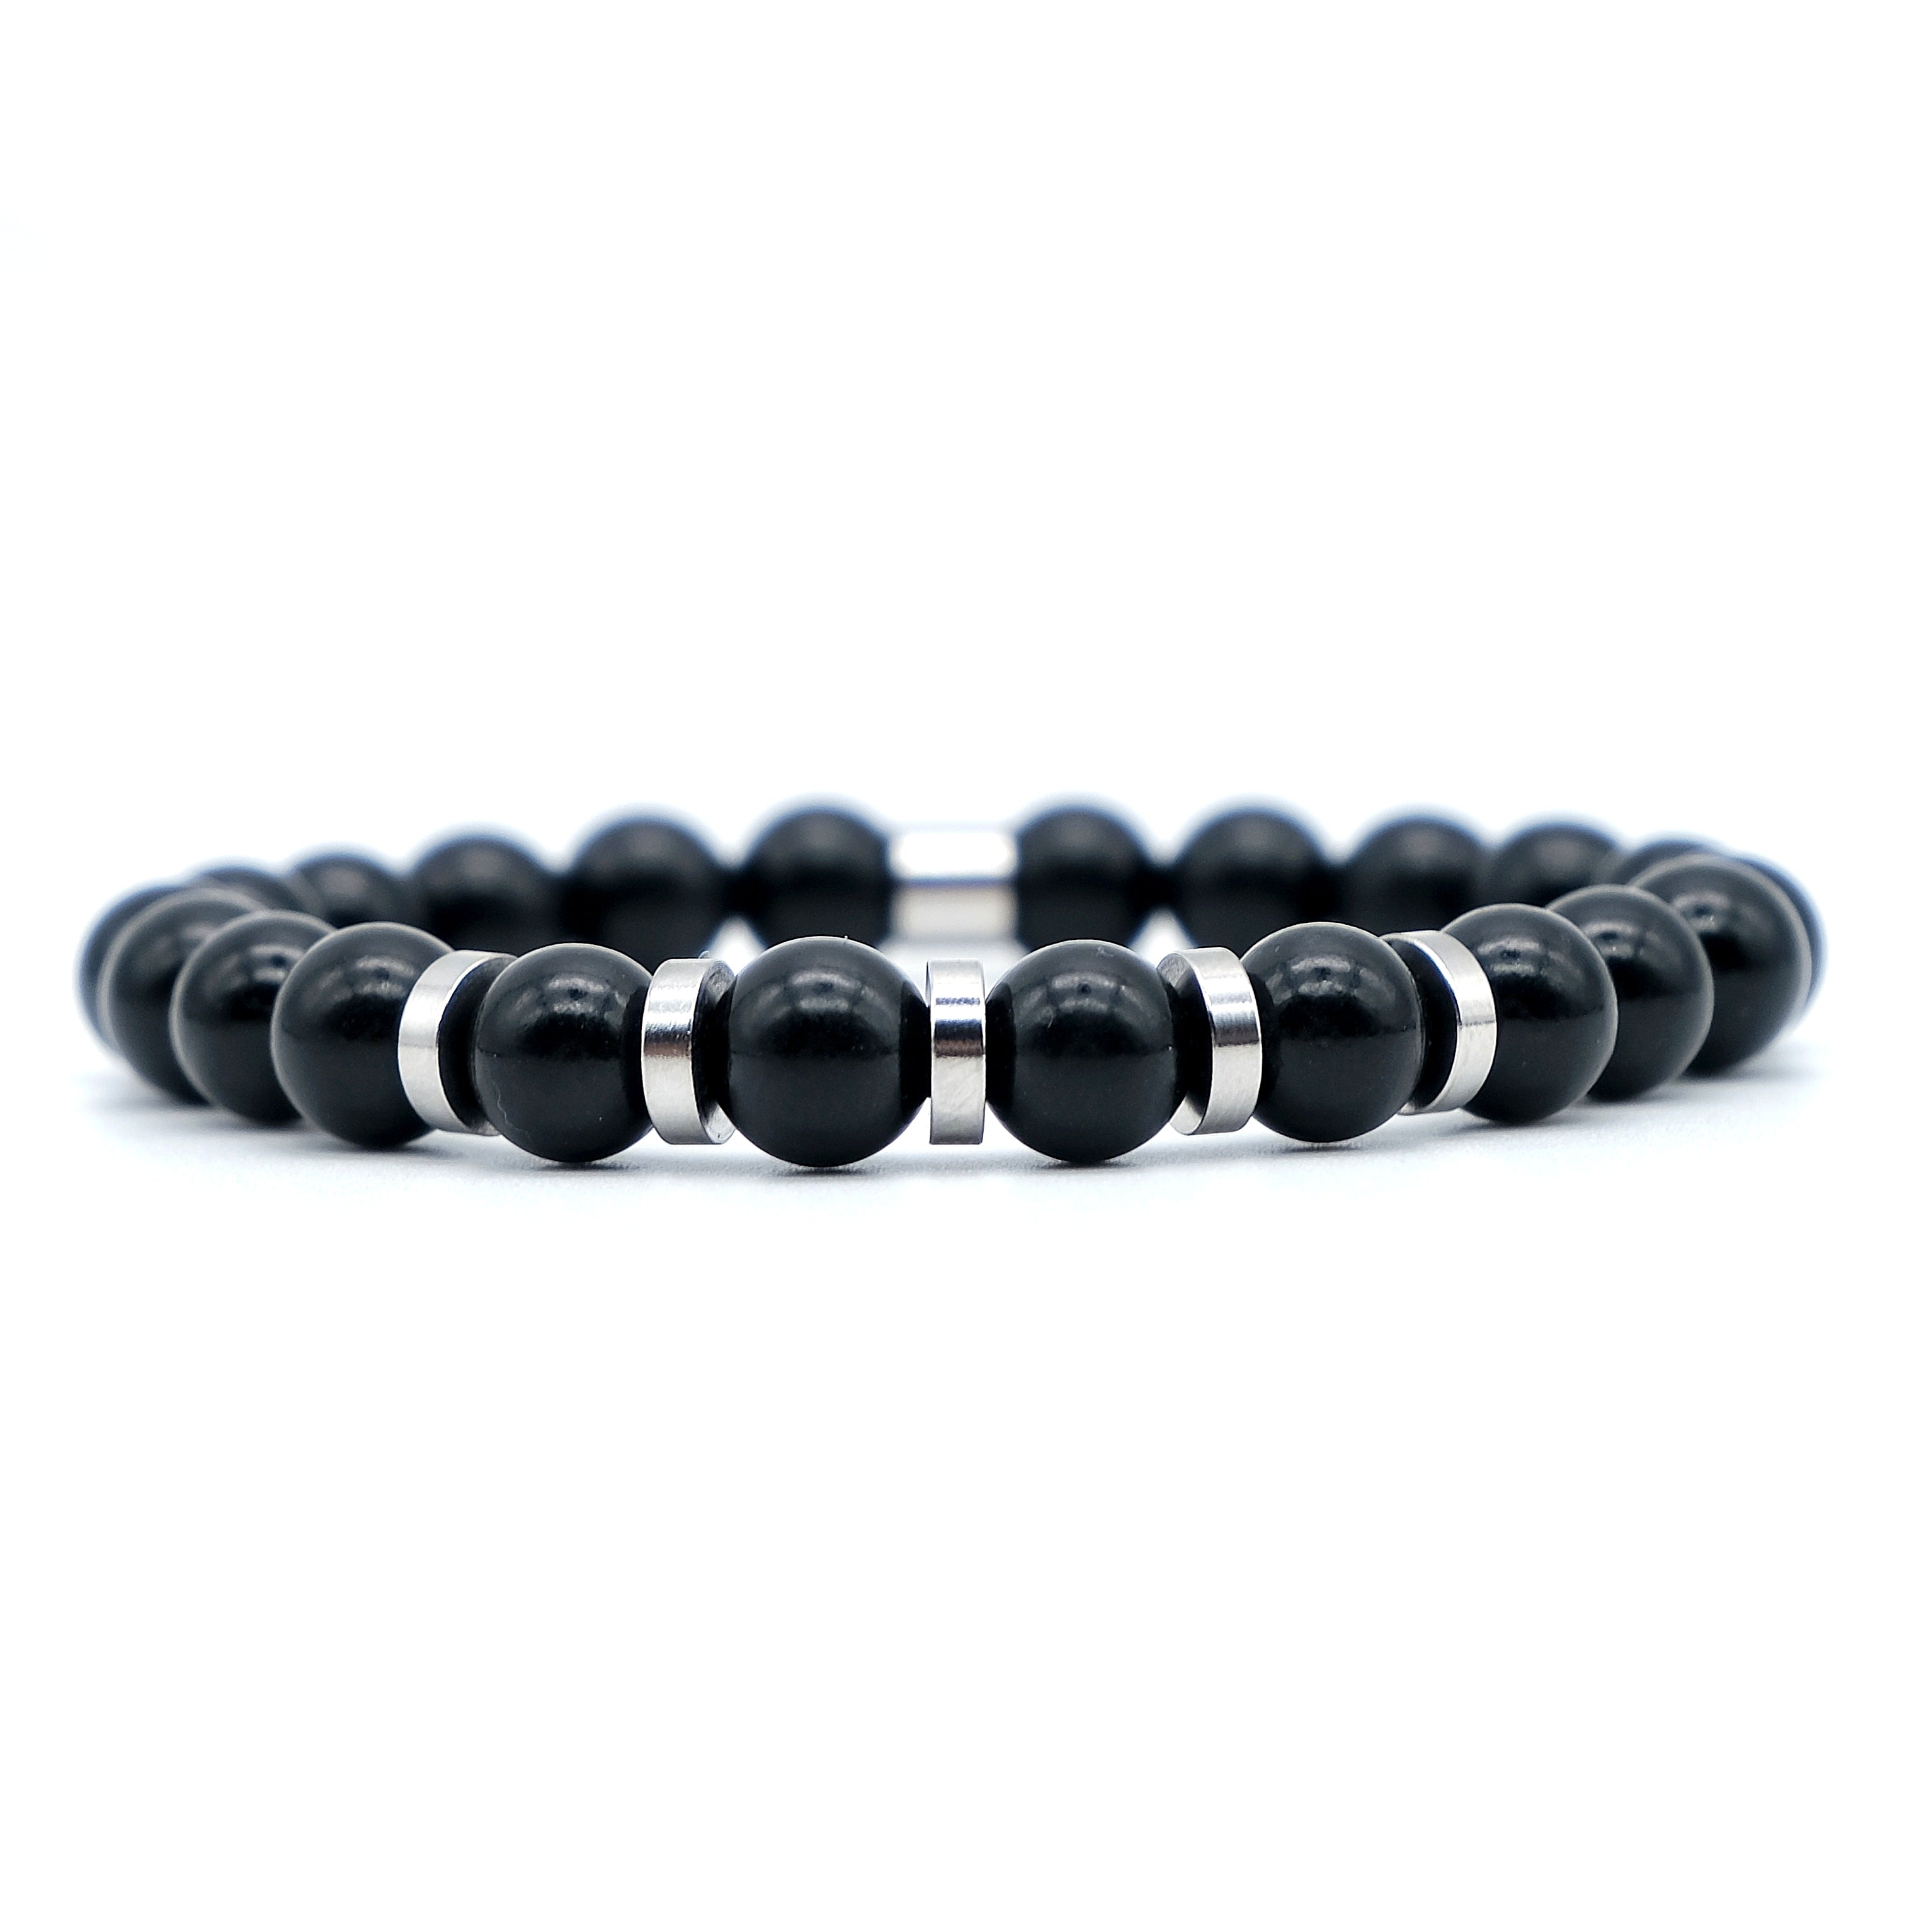 A shungite gemstone bracelet with stainless steel accessories